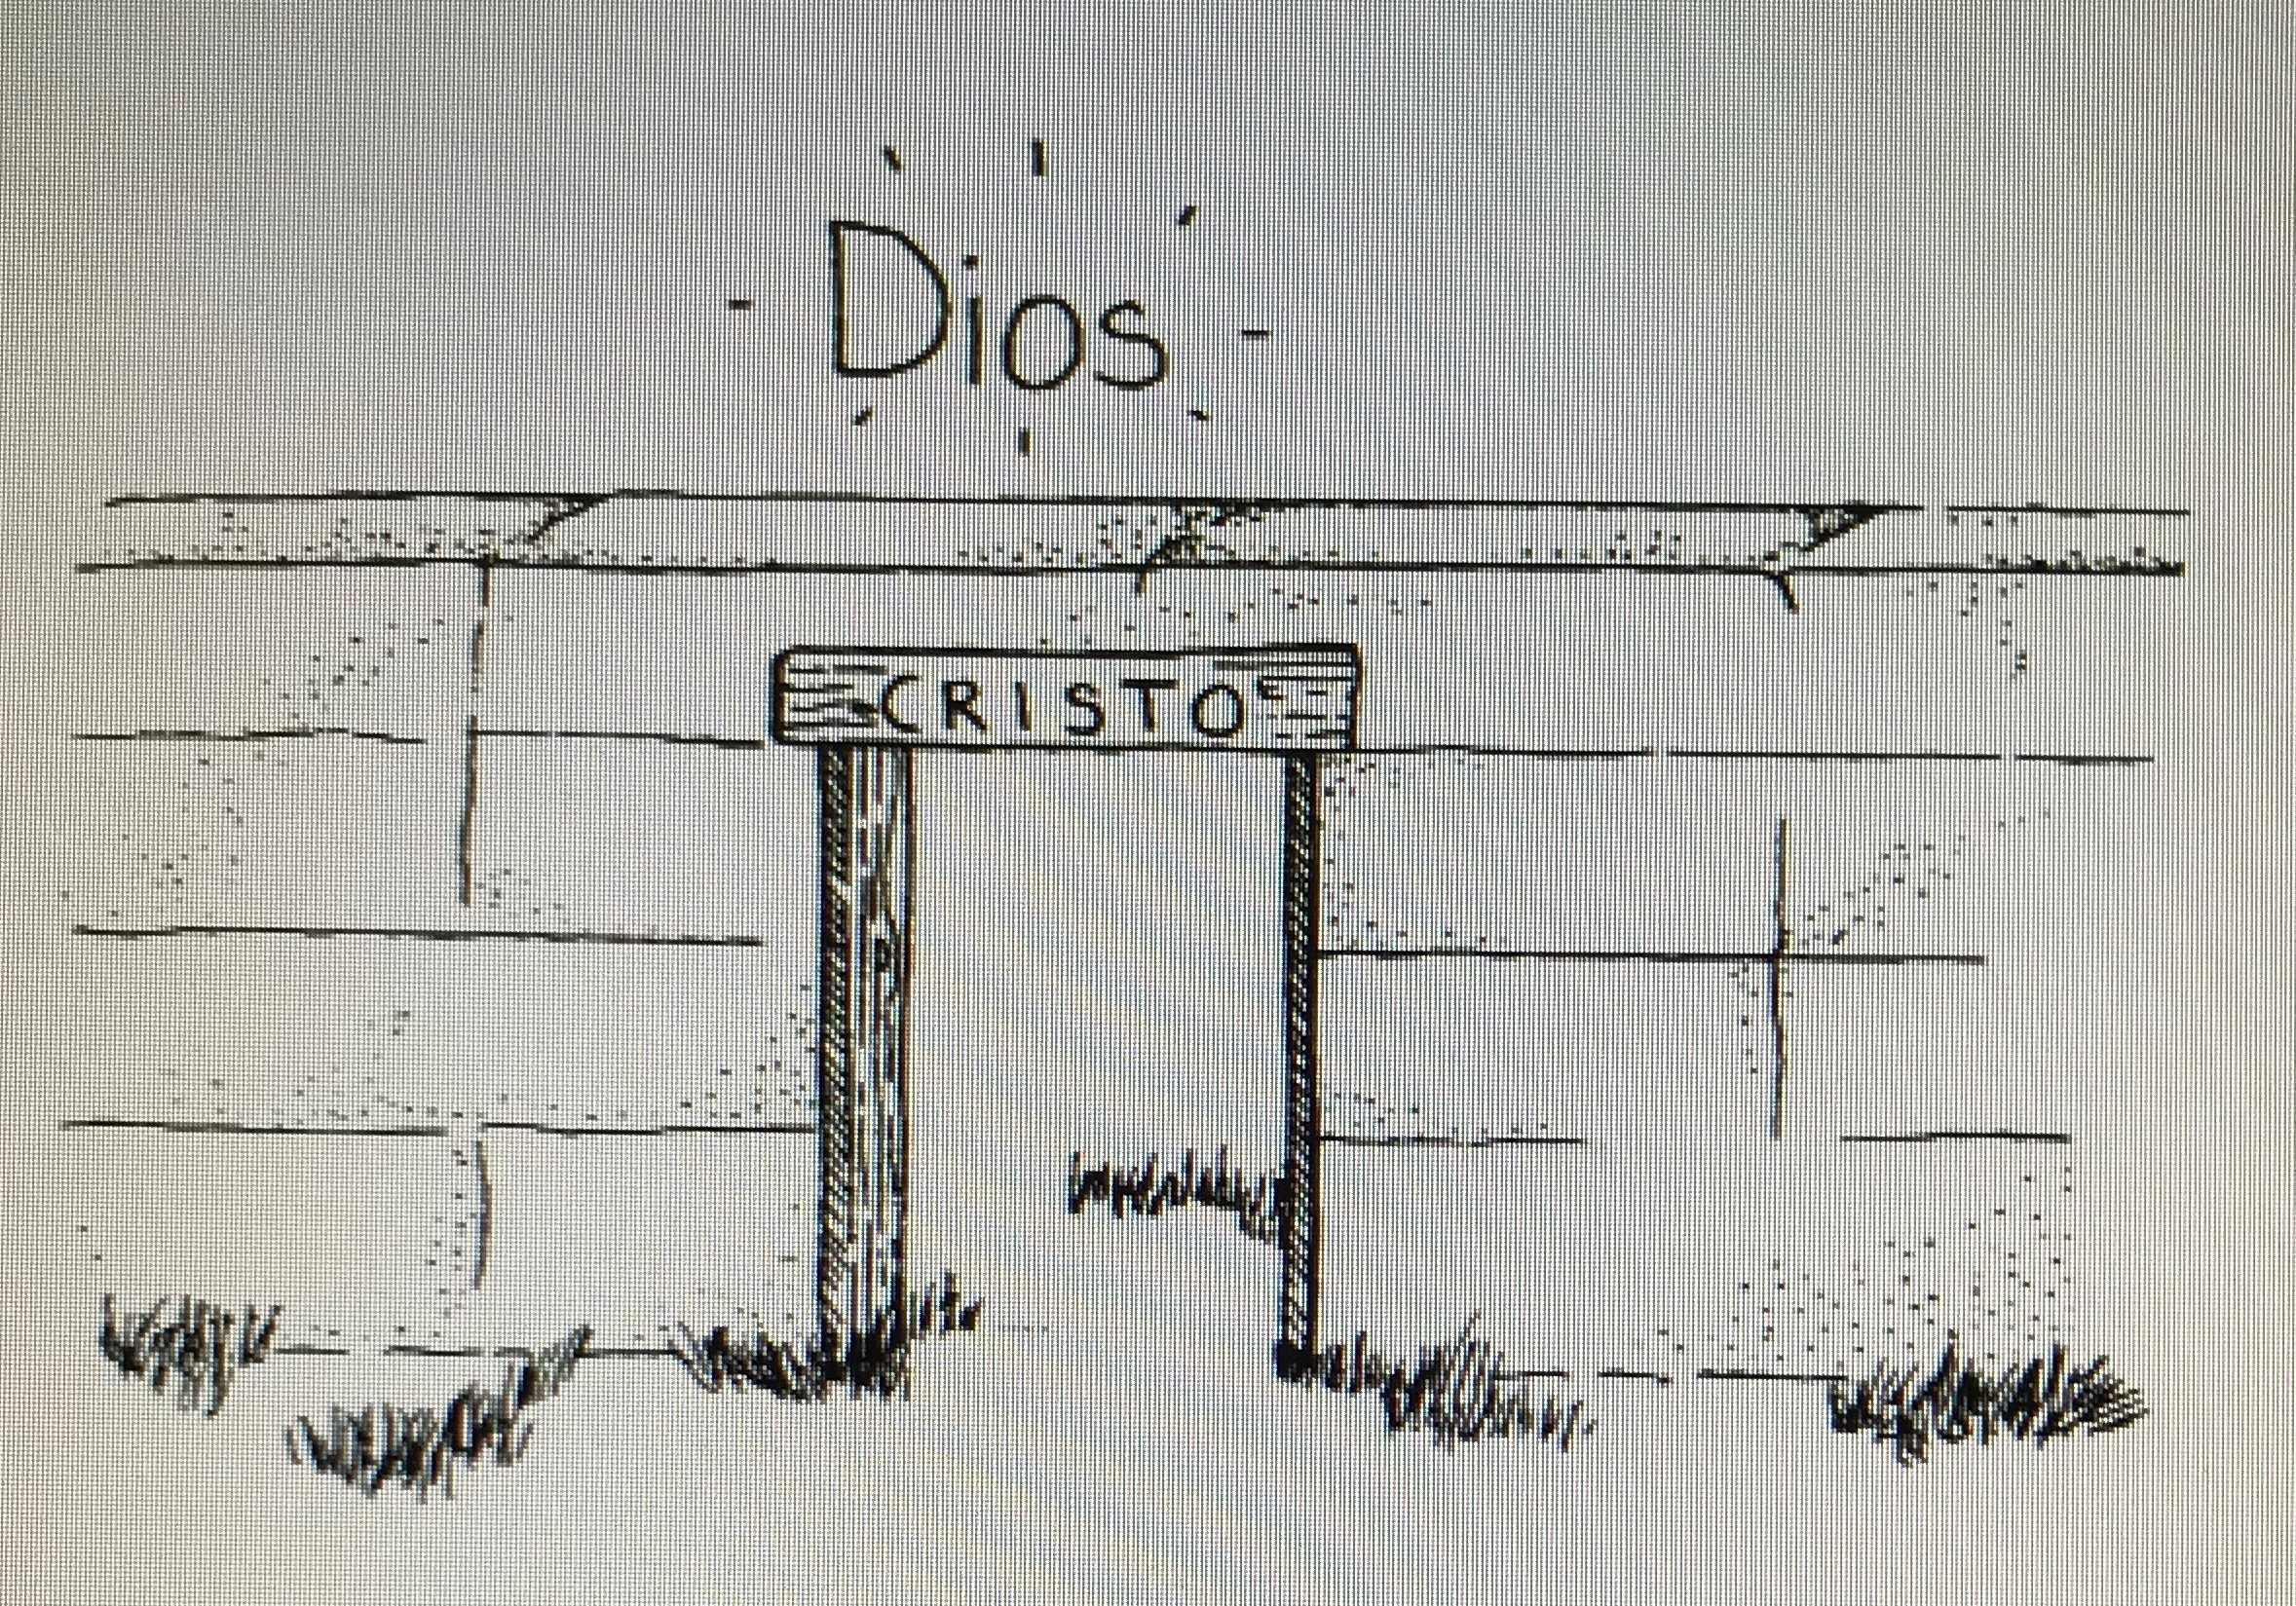 Illustration of a stone wall. Beyond the wall is written 'Dios' meaning 'God'. The open doorway is labelled 'Cristo' meaning 'Christ'.